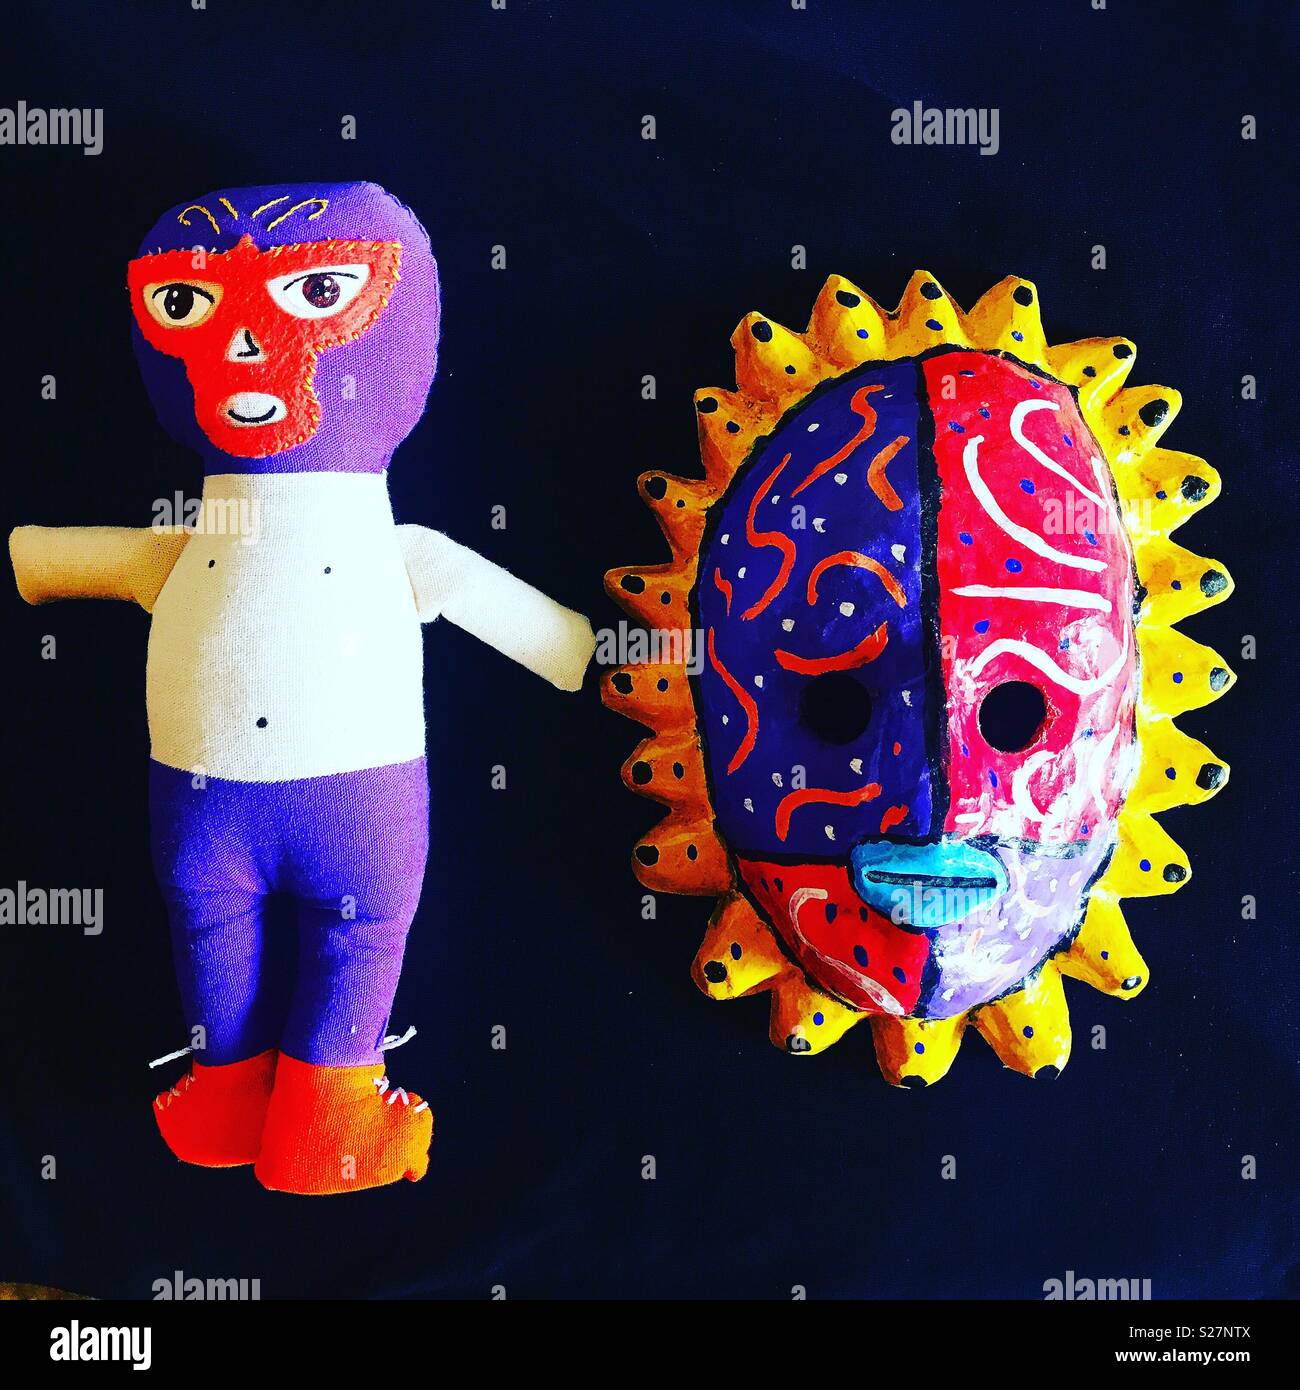 A toy dressed as a Mexican wrestler and a sun mask decorate Taller Tlamaxcalli in Colonia Roma, Mexico City, Mexico Stock Photo